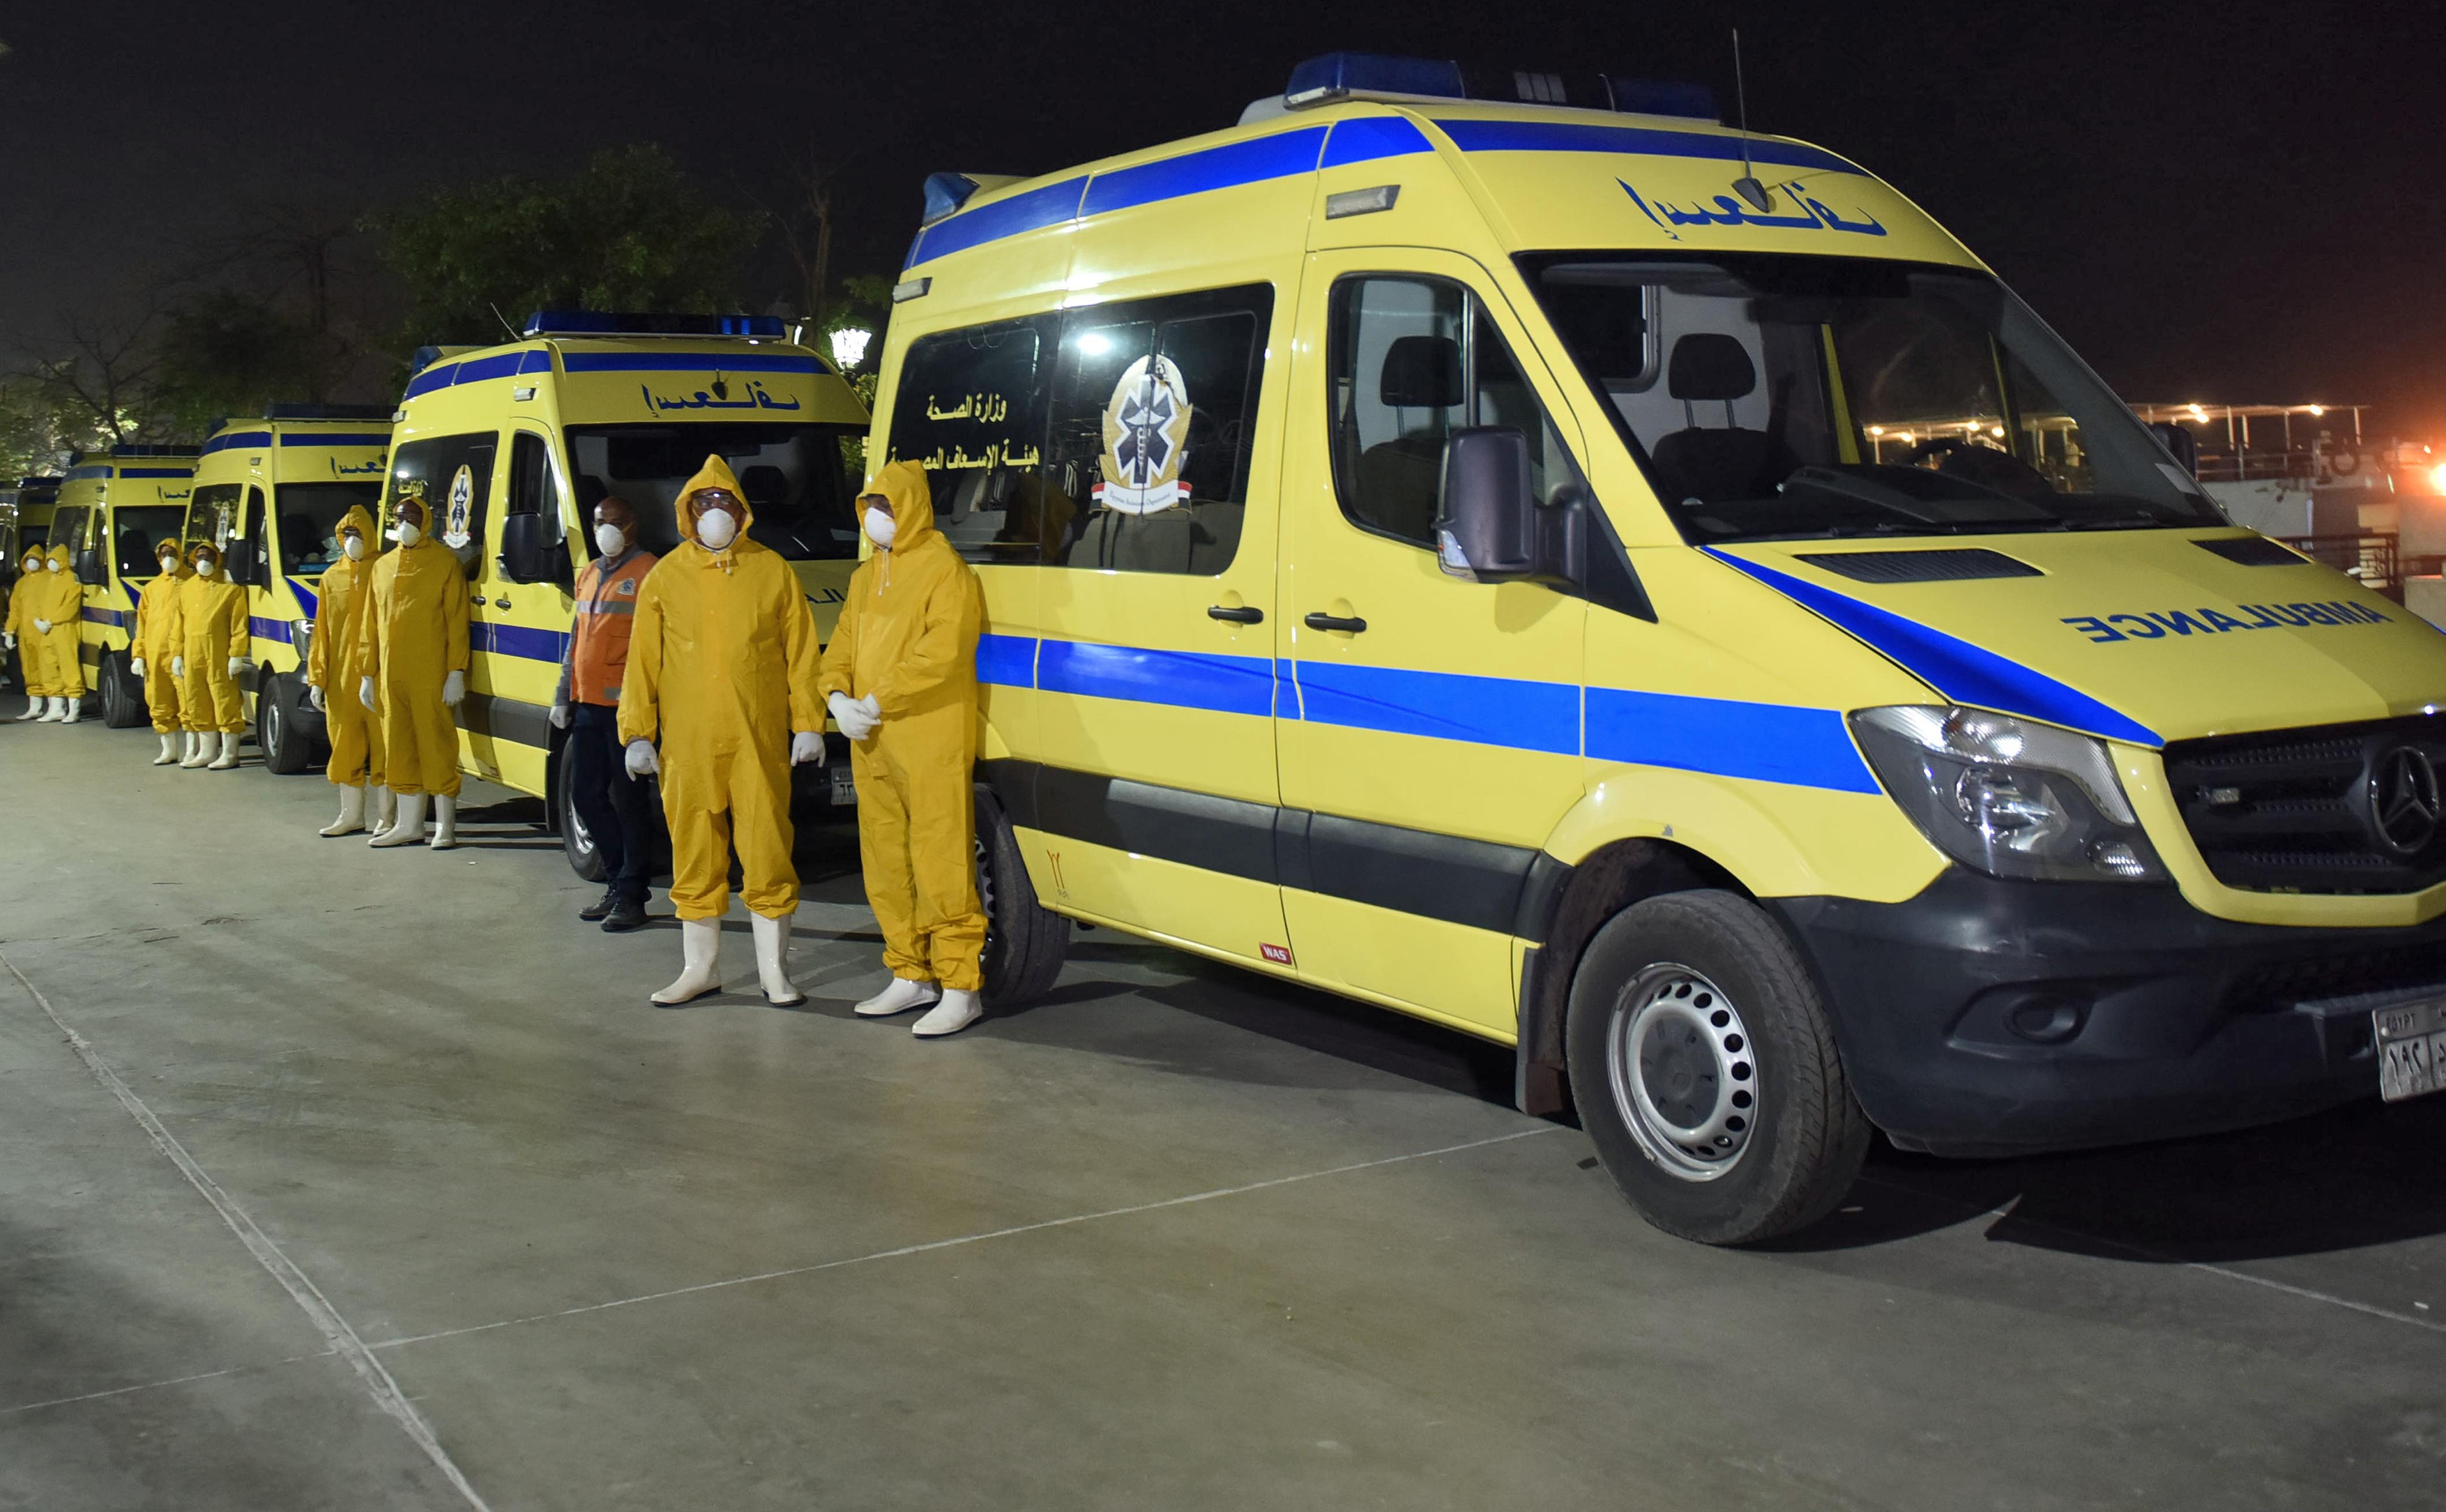  Emergency responders transport suspected COVID-19 coronavirus disease cases that were detected on a Nile cruise ship in Luxor late on 7 March 